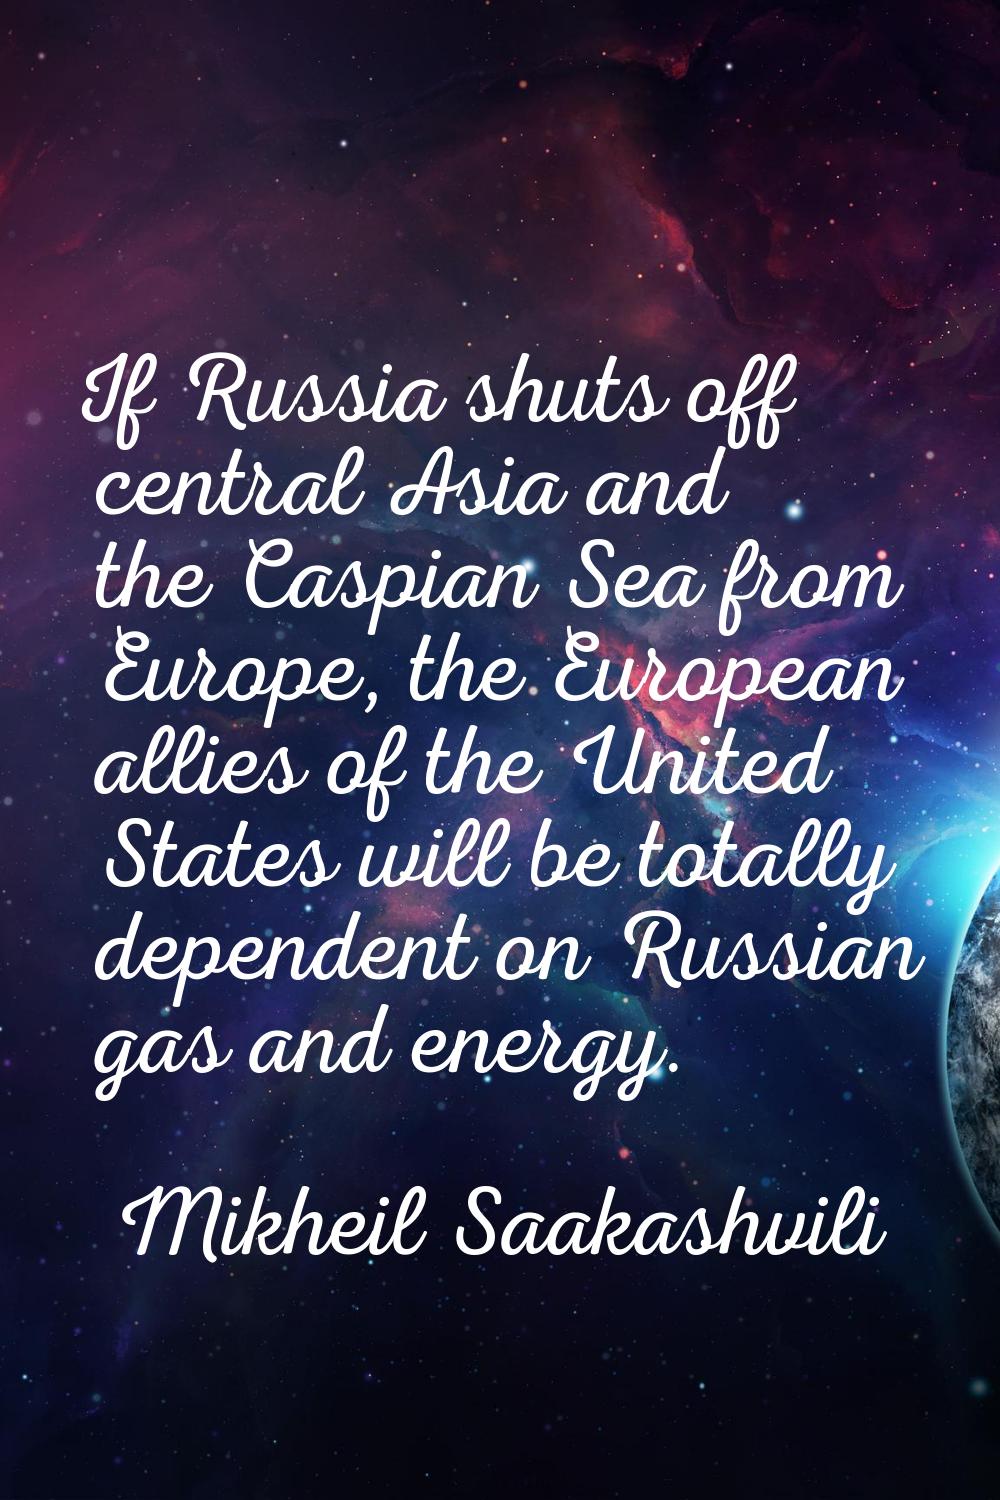 If Russia shuts off central Asia and the Caspian Sea from Europe, the European allies of the United